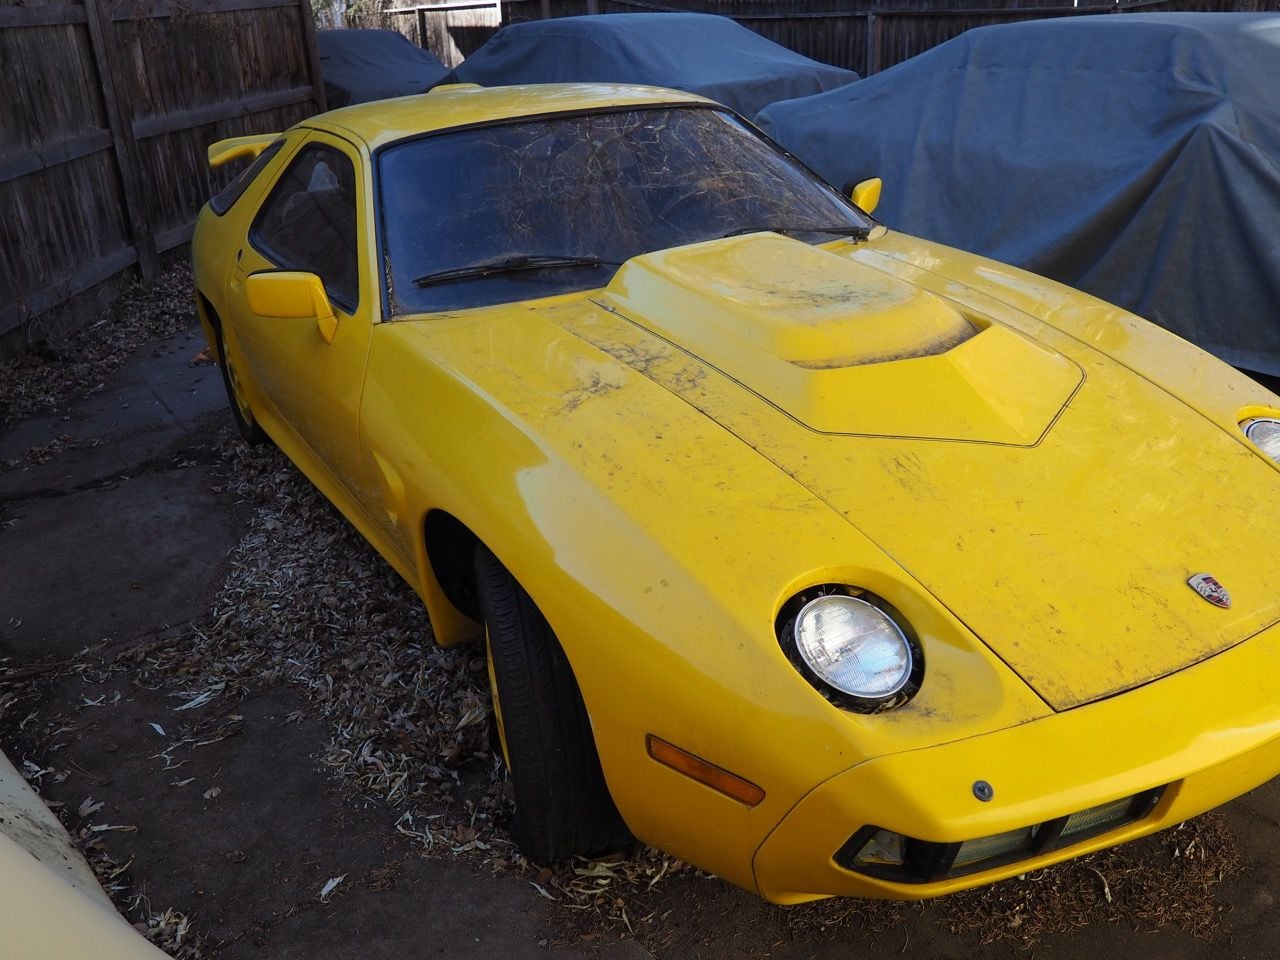 1979 Porsche 928 - 1979 Porsche 928 - Used - VIN 9289201881 - 60,441 Miles - 8 cyl - 2WD - Manual - Coupe - Yellow - Colorado Springs, CO 80906, United States